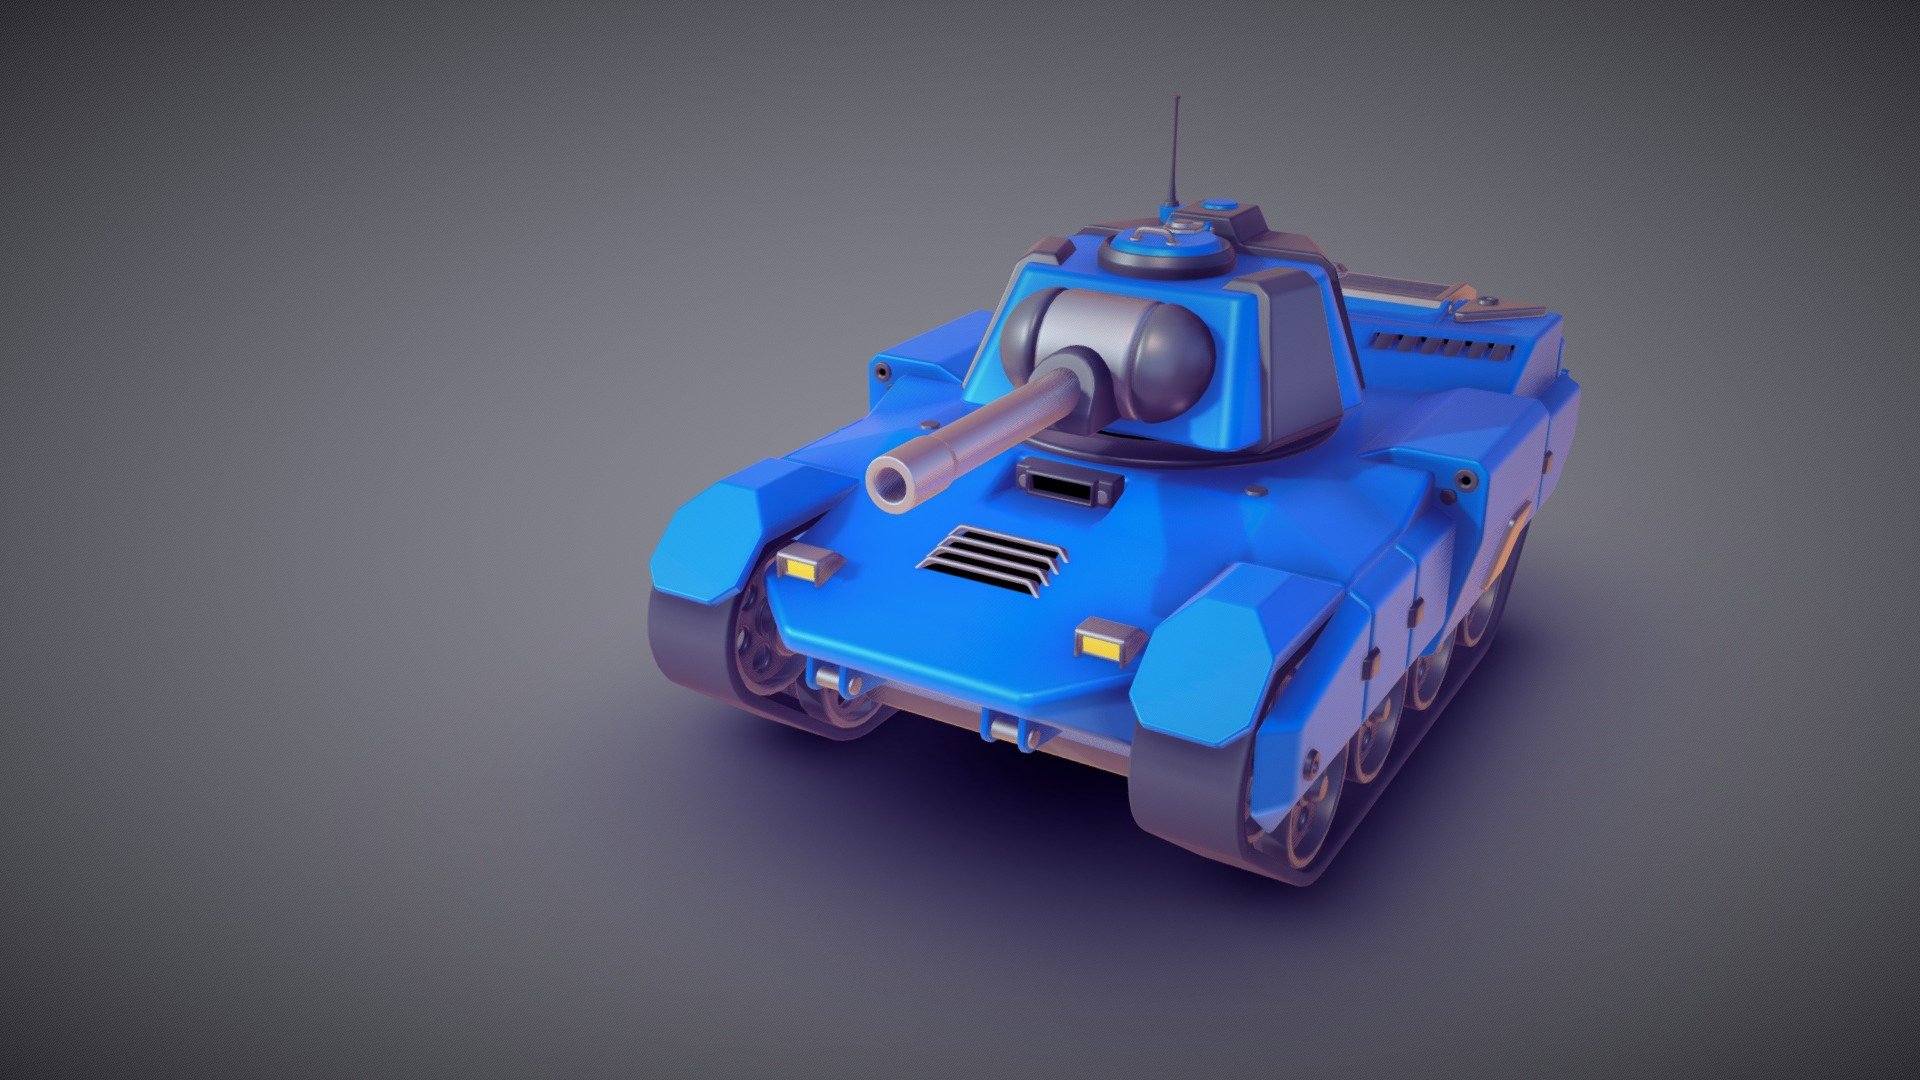 The Battle Wagon from the Steam game Tank Blazers!
We used a medium poly approach for the tank, to speed up production and to have an easy to read game 3d model